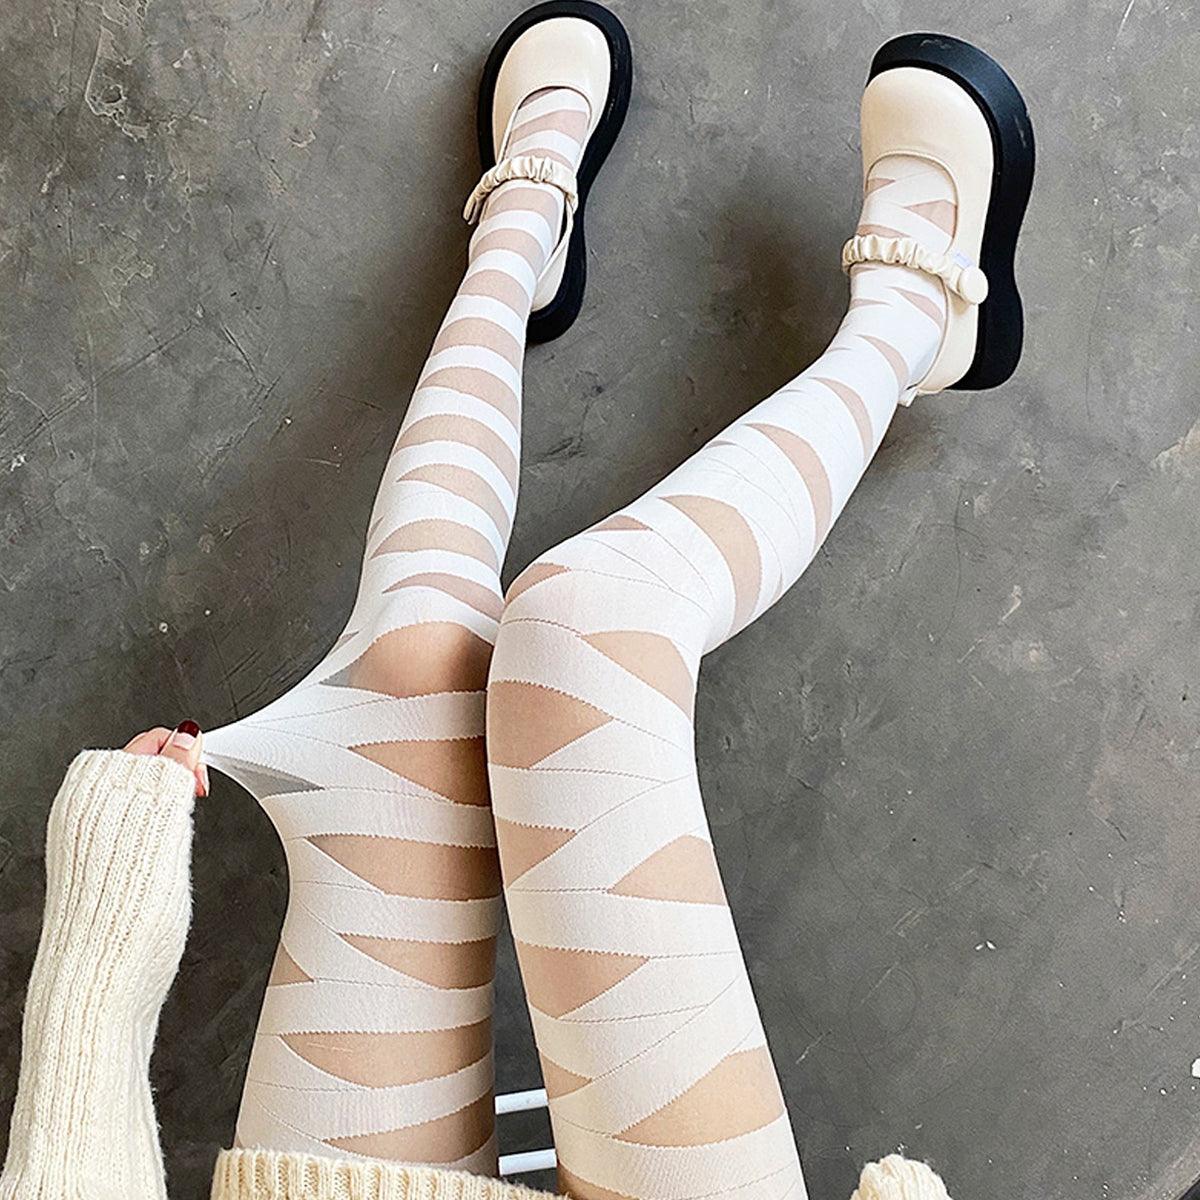 Lace Cross Bandaged Aesthetic Tights - Aesthetic Clothes Shop